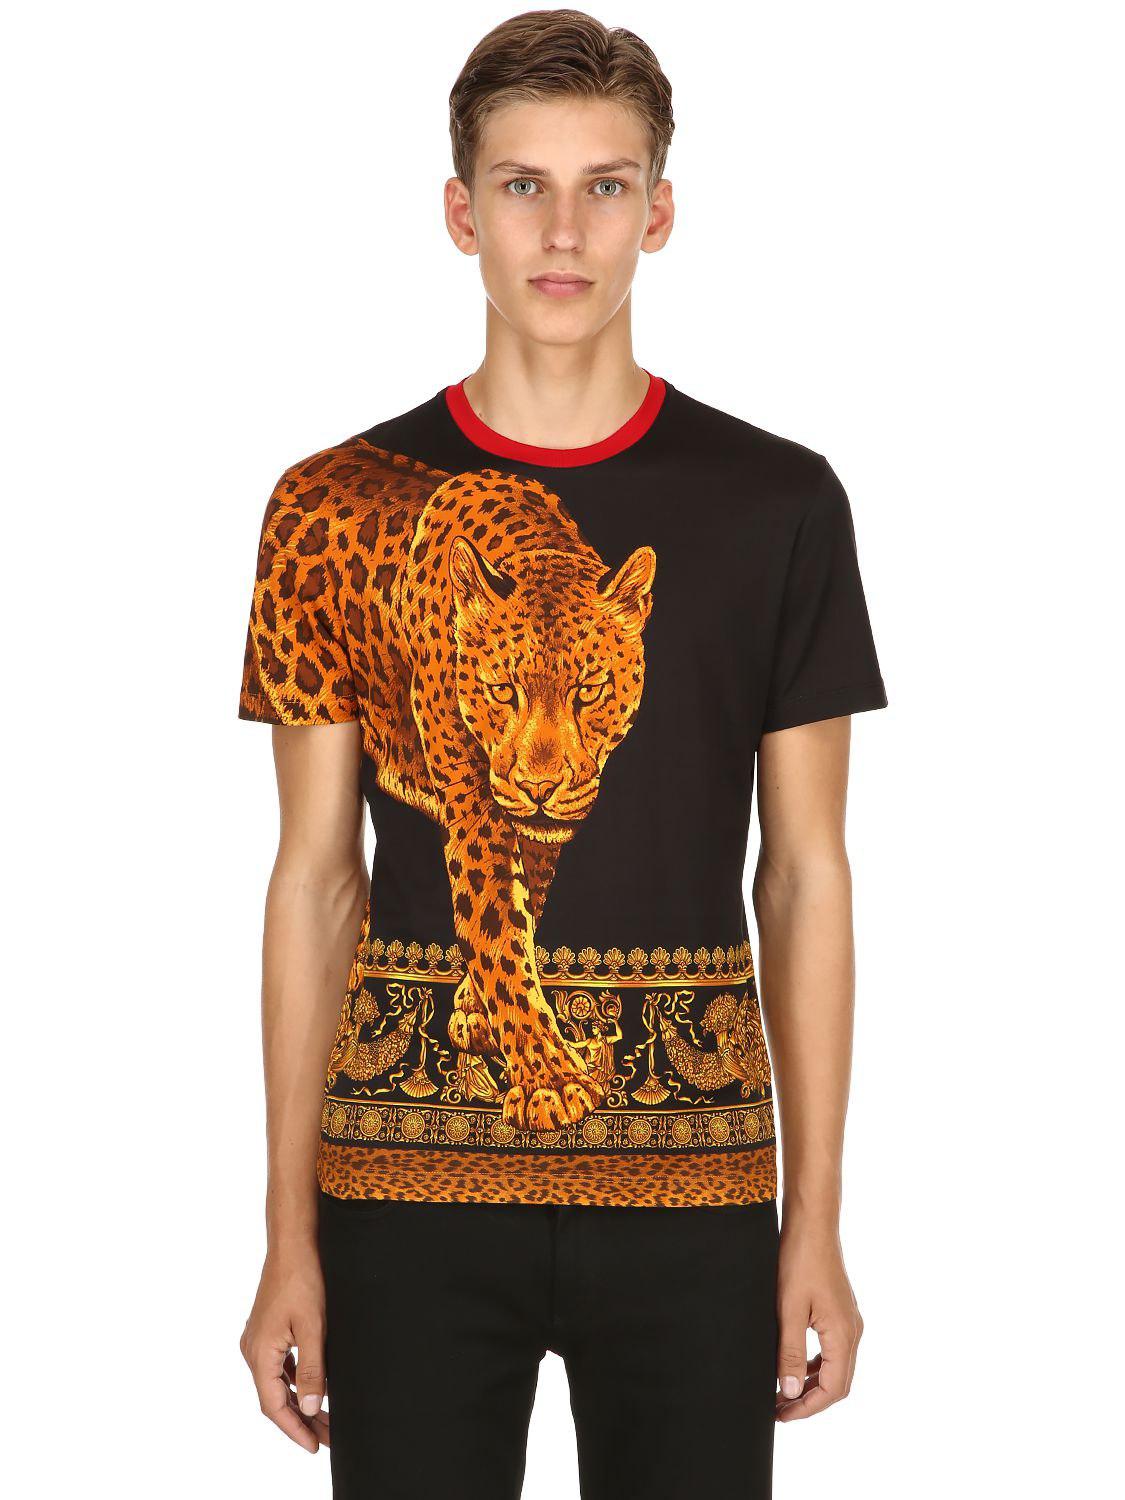 Versace Leopard Printed Cotton Jersey T-shirt in Black/Gold 